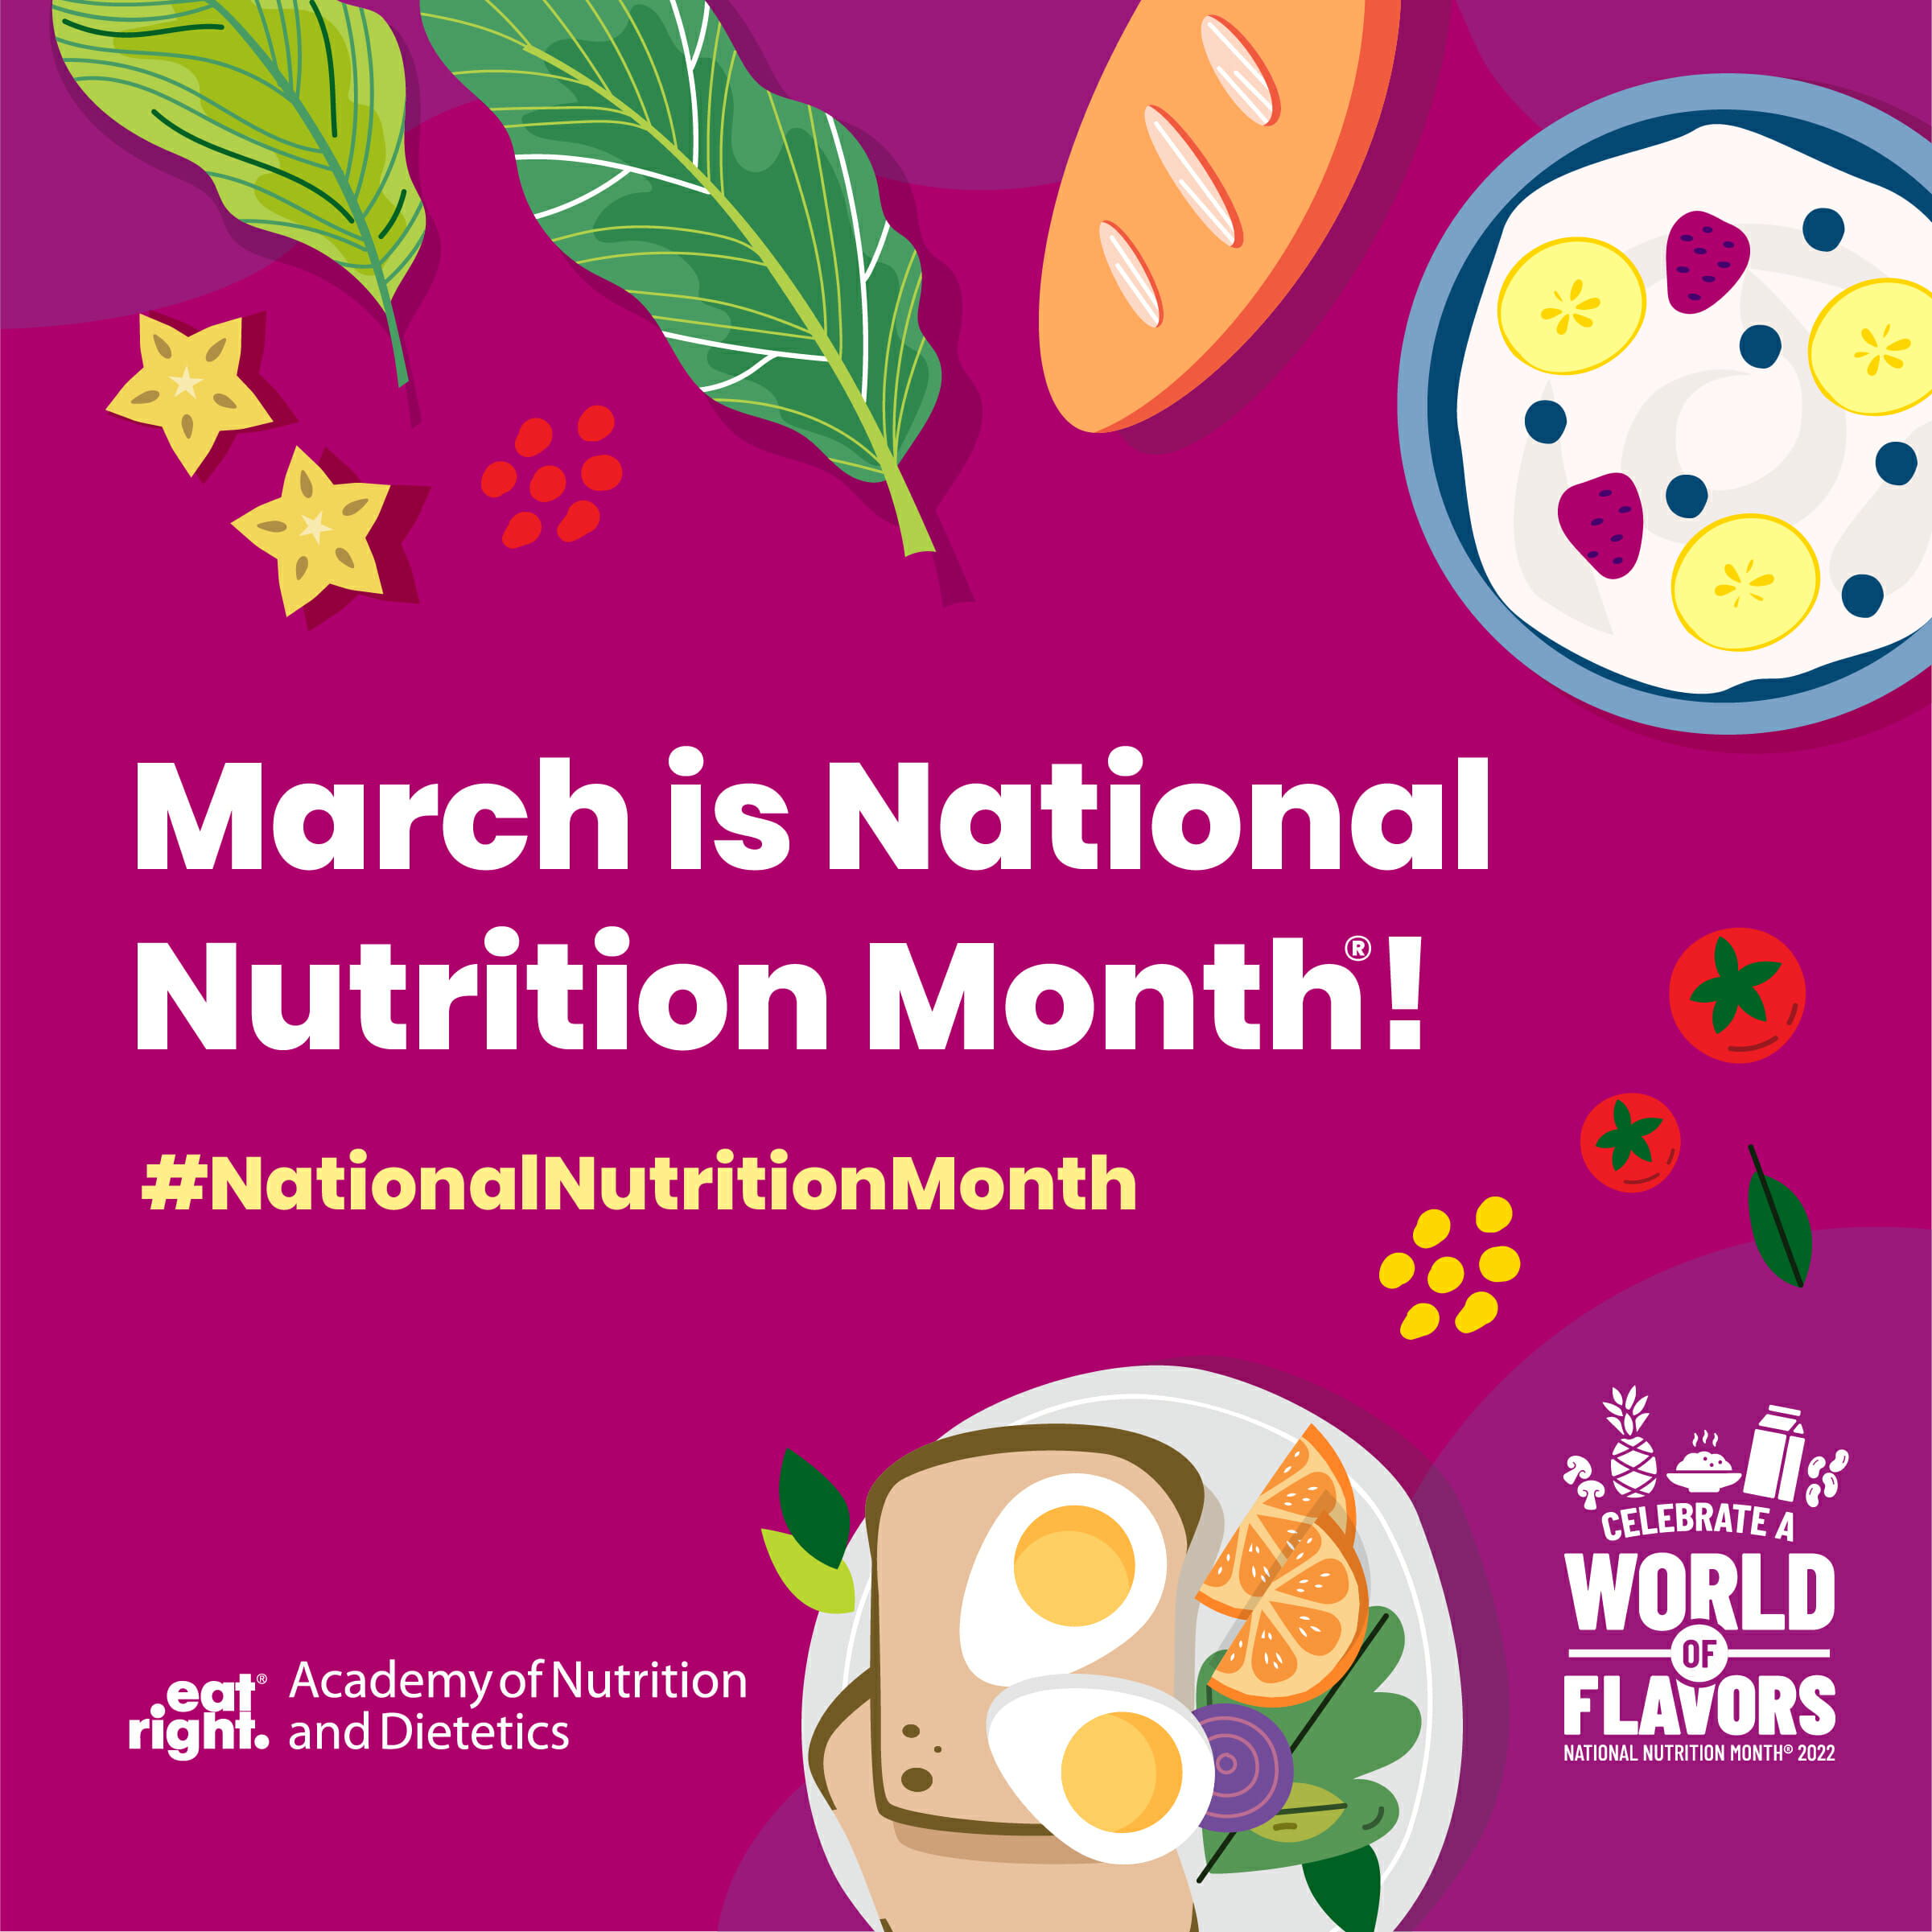 National Nutrition Month celebrate